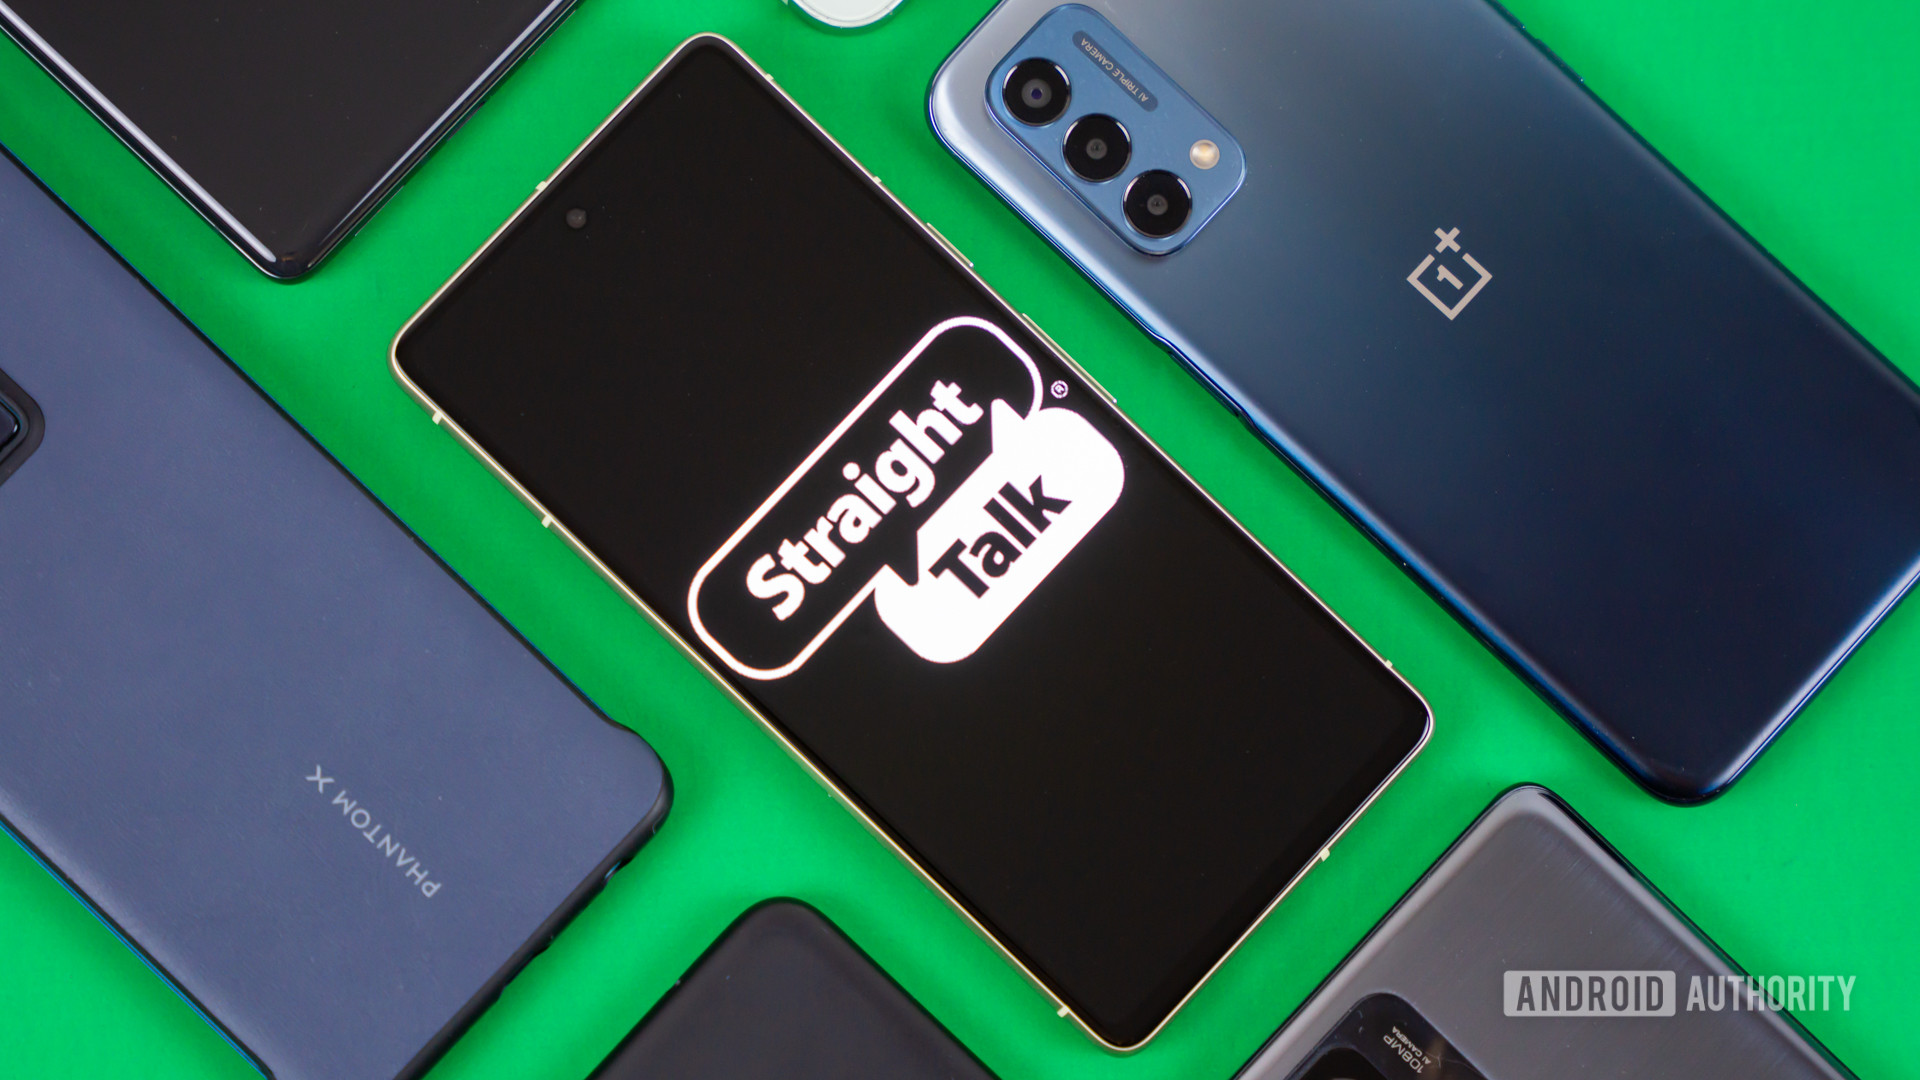 Stock photo of Straight Talk logo on phone with many devices 4